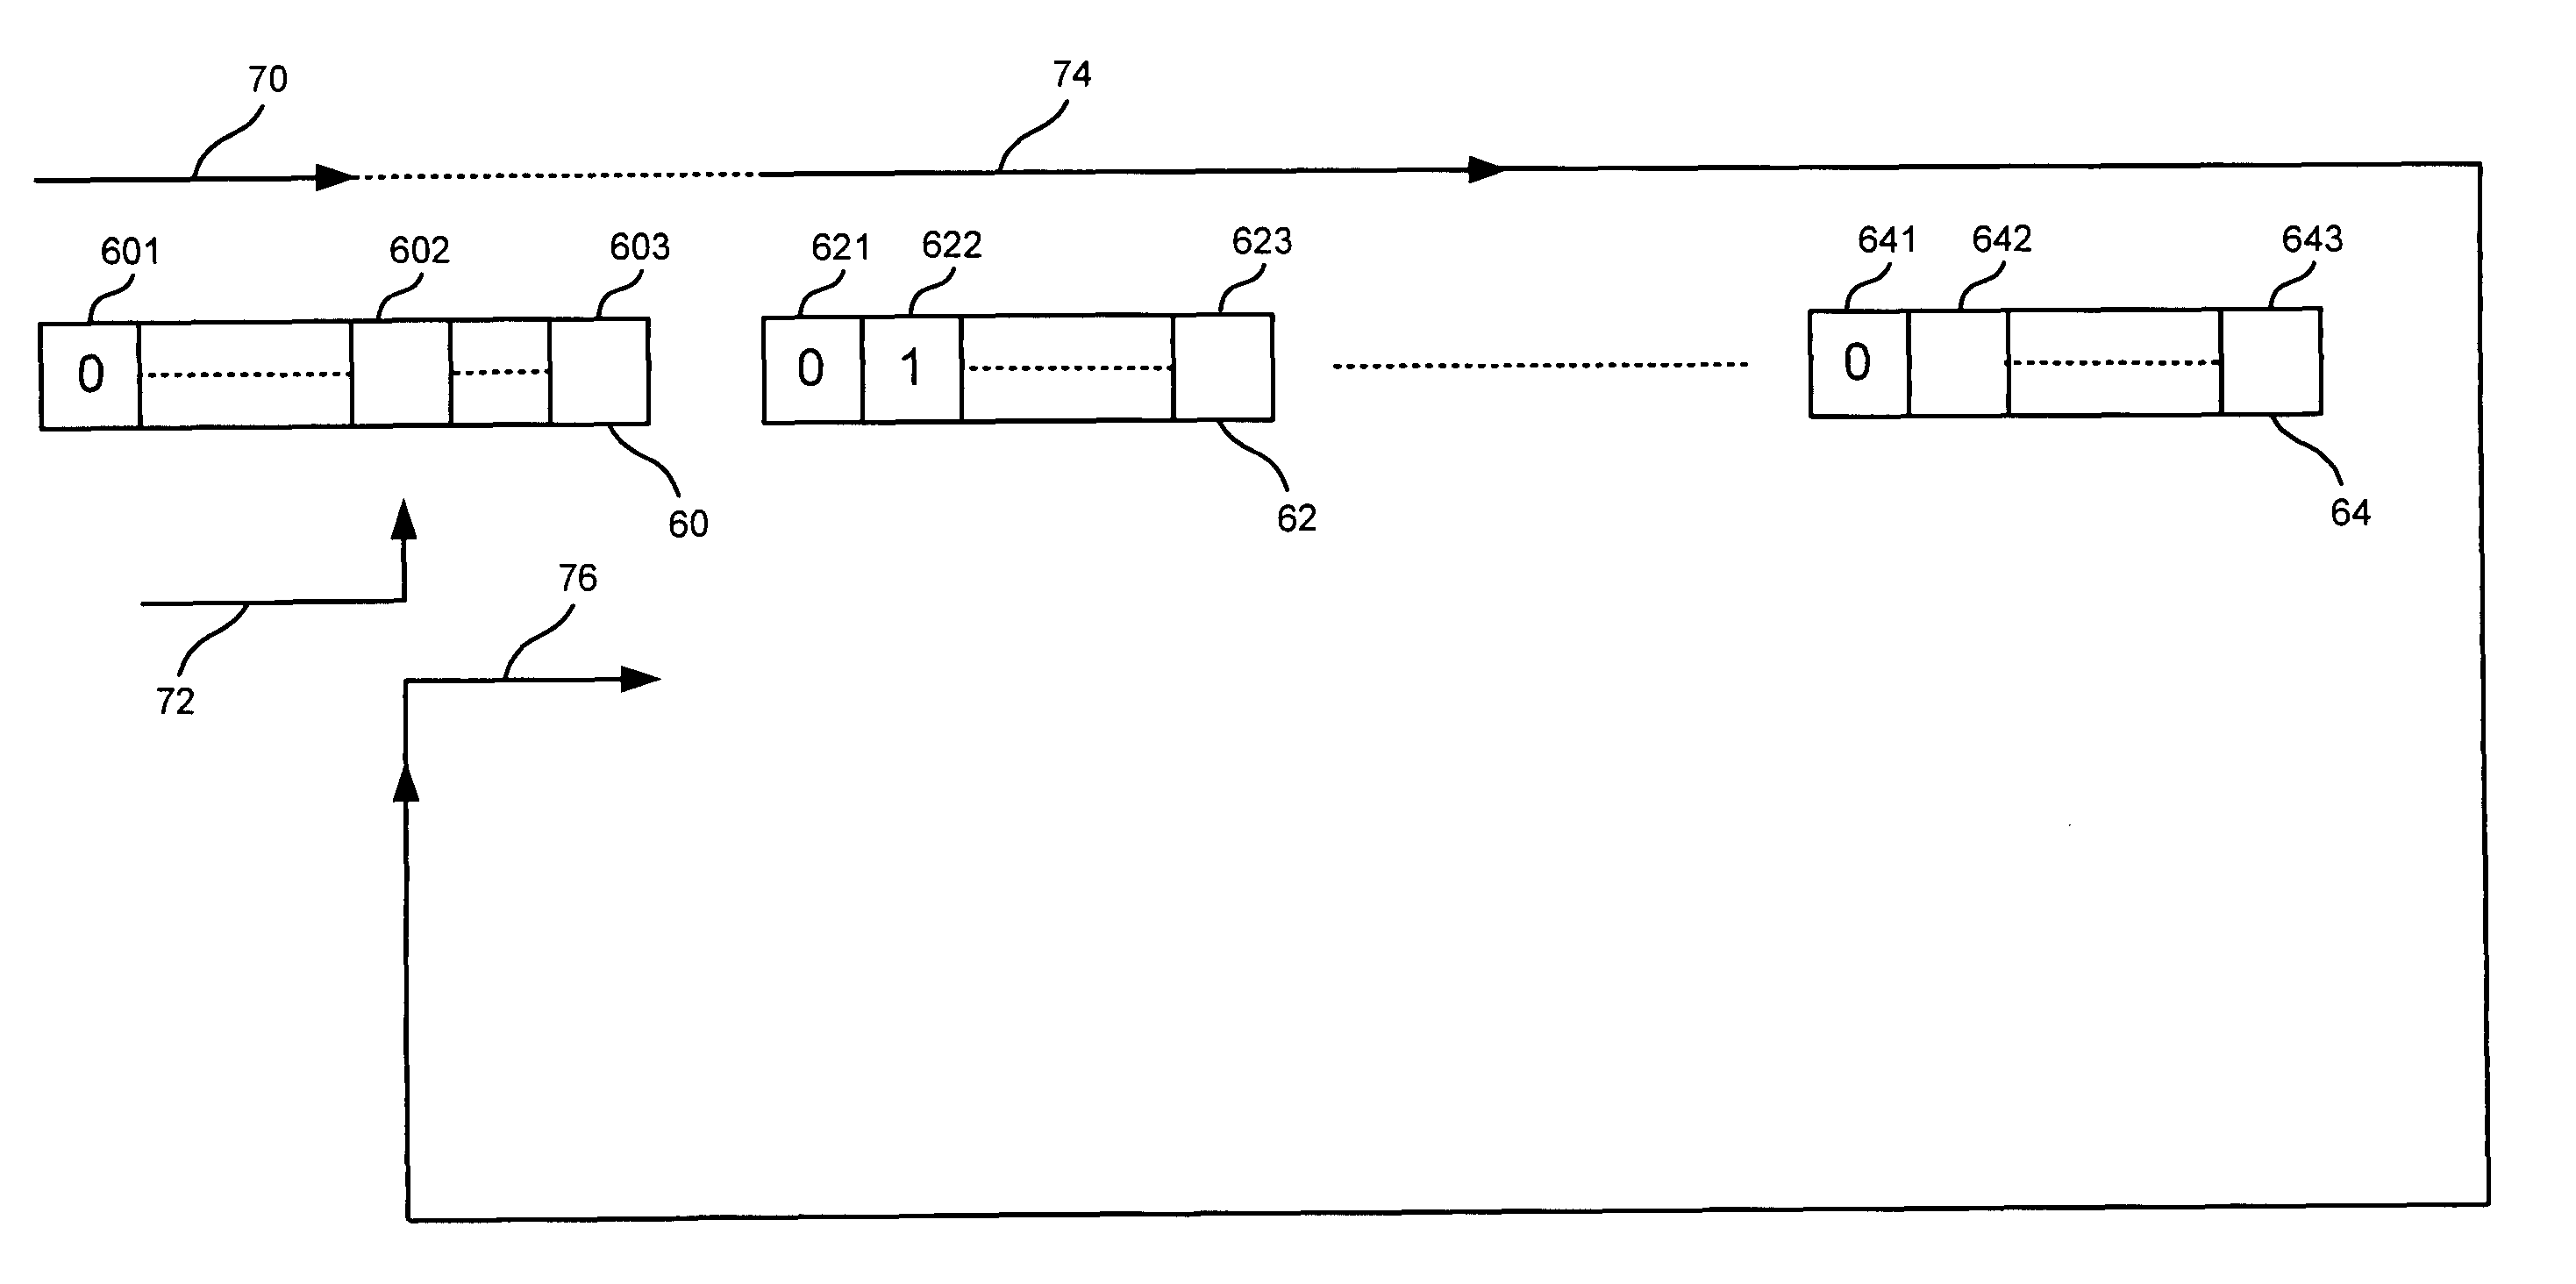 Memory controller having a buffer for providing beginning and end data